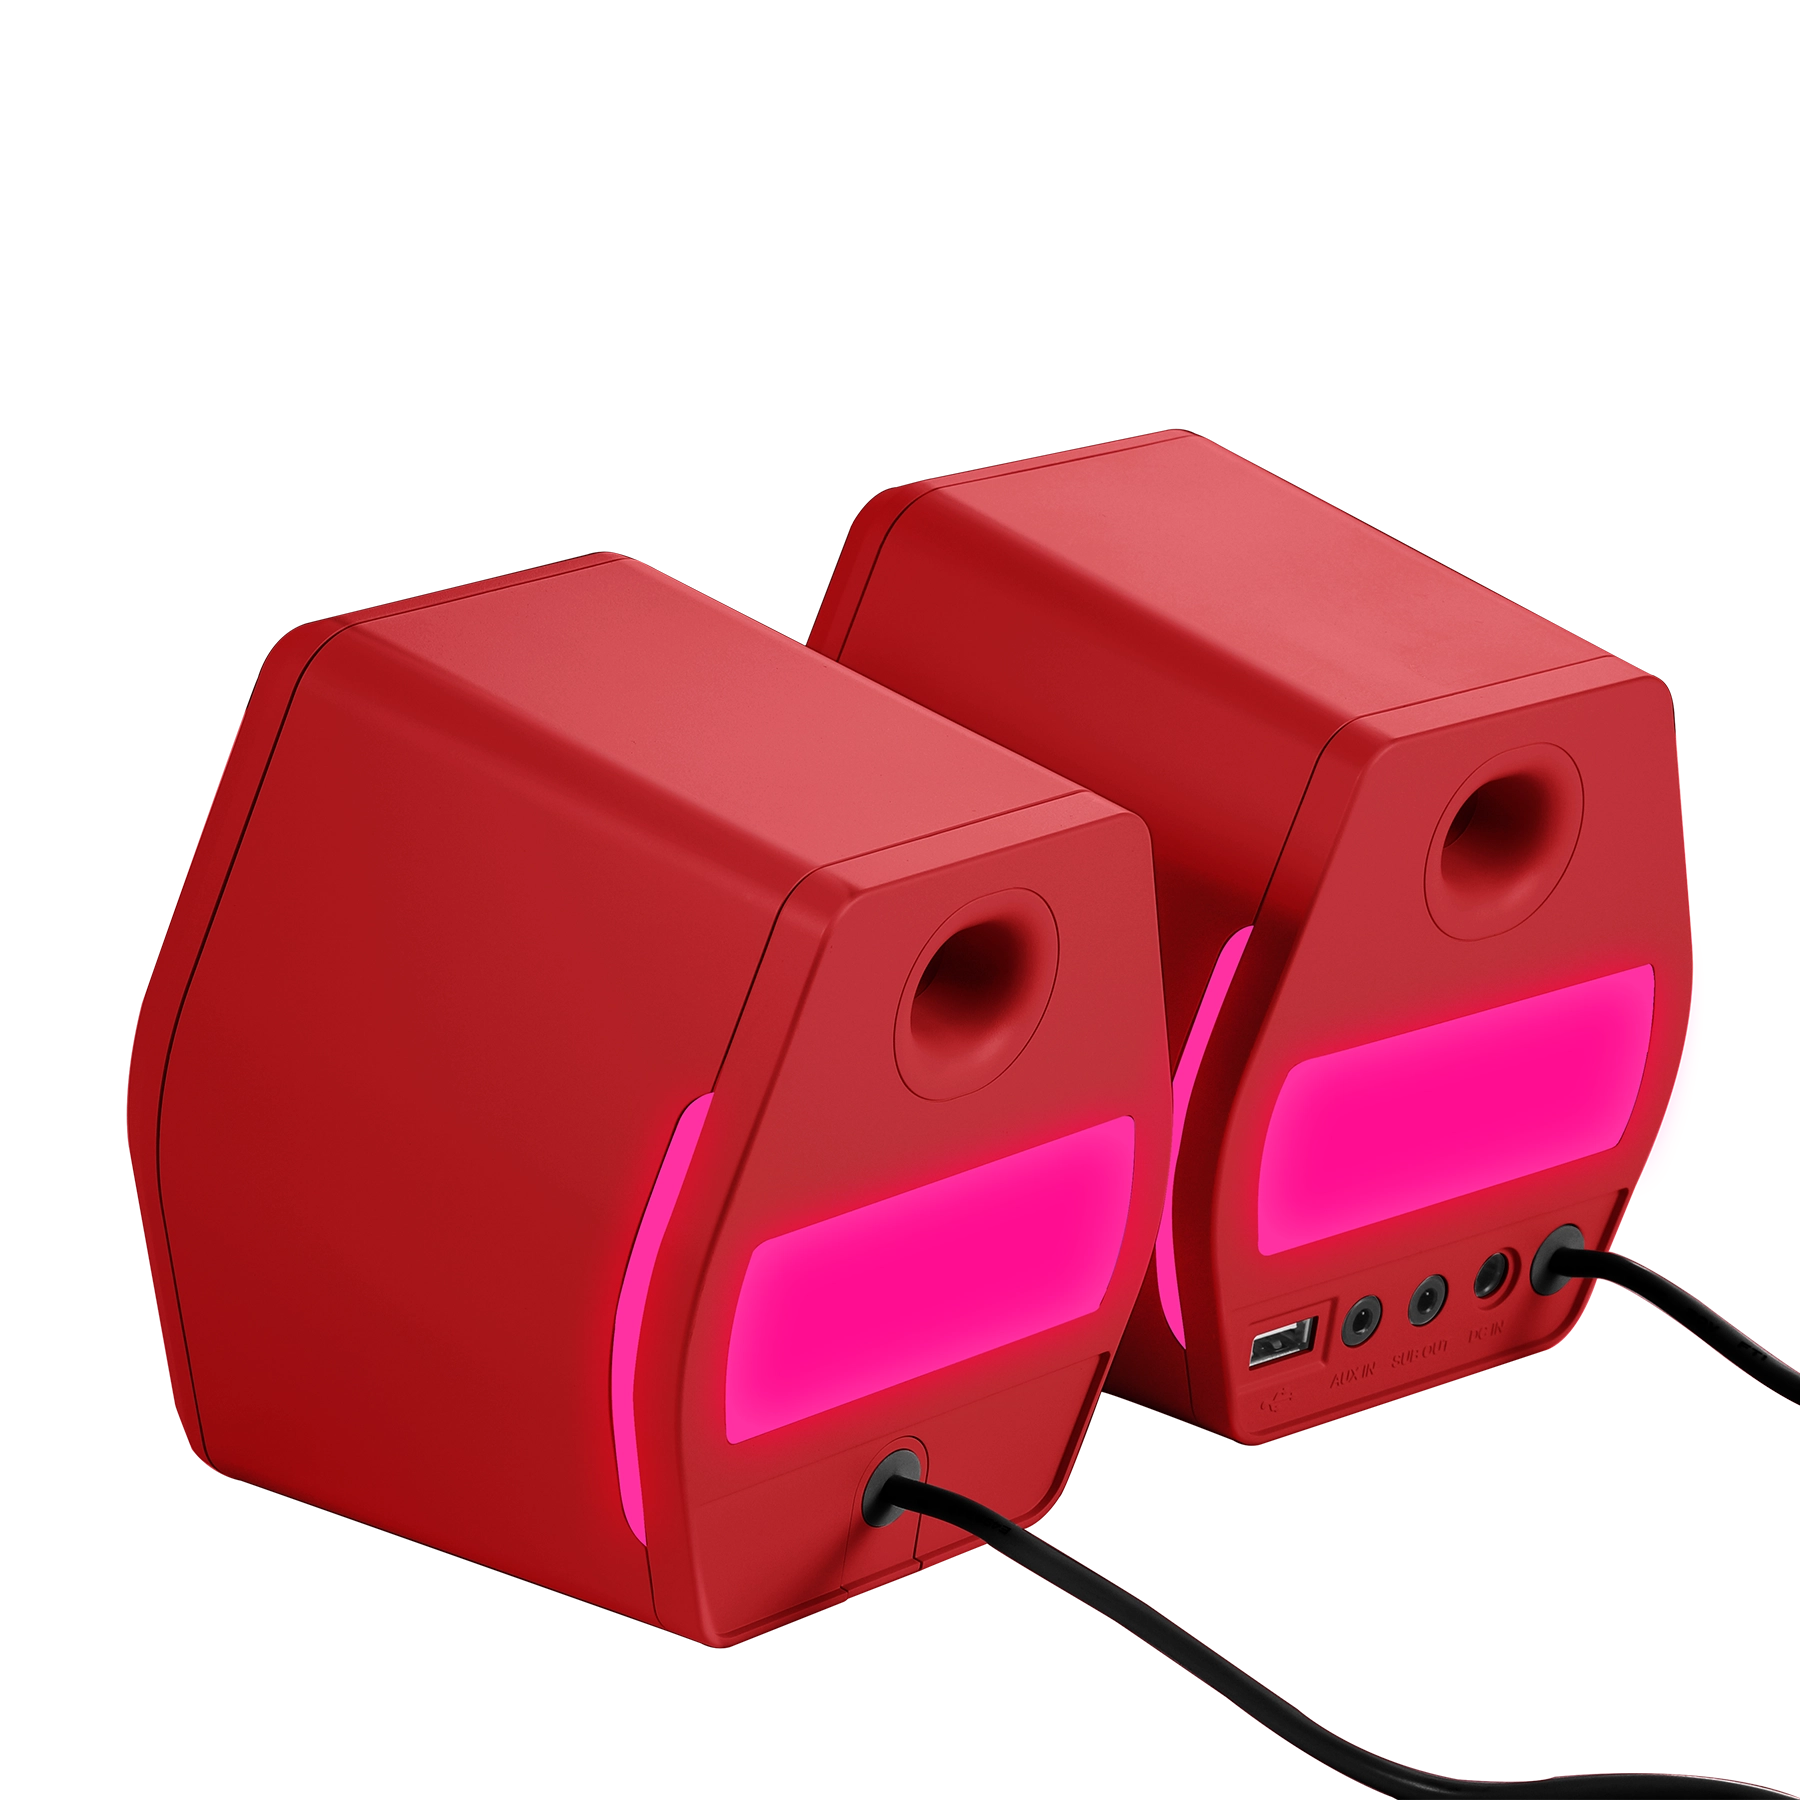 G2000 Speaker Product Picture red_